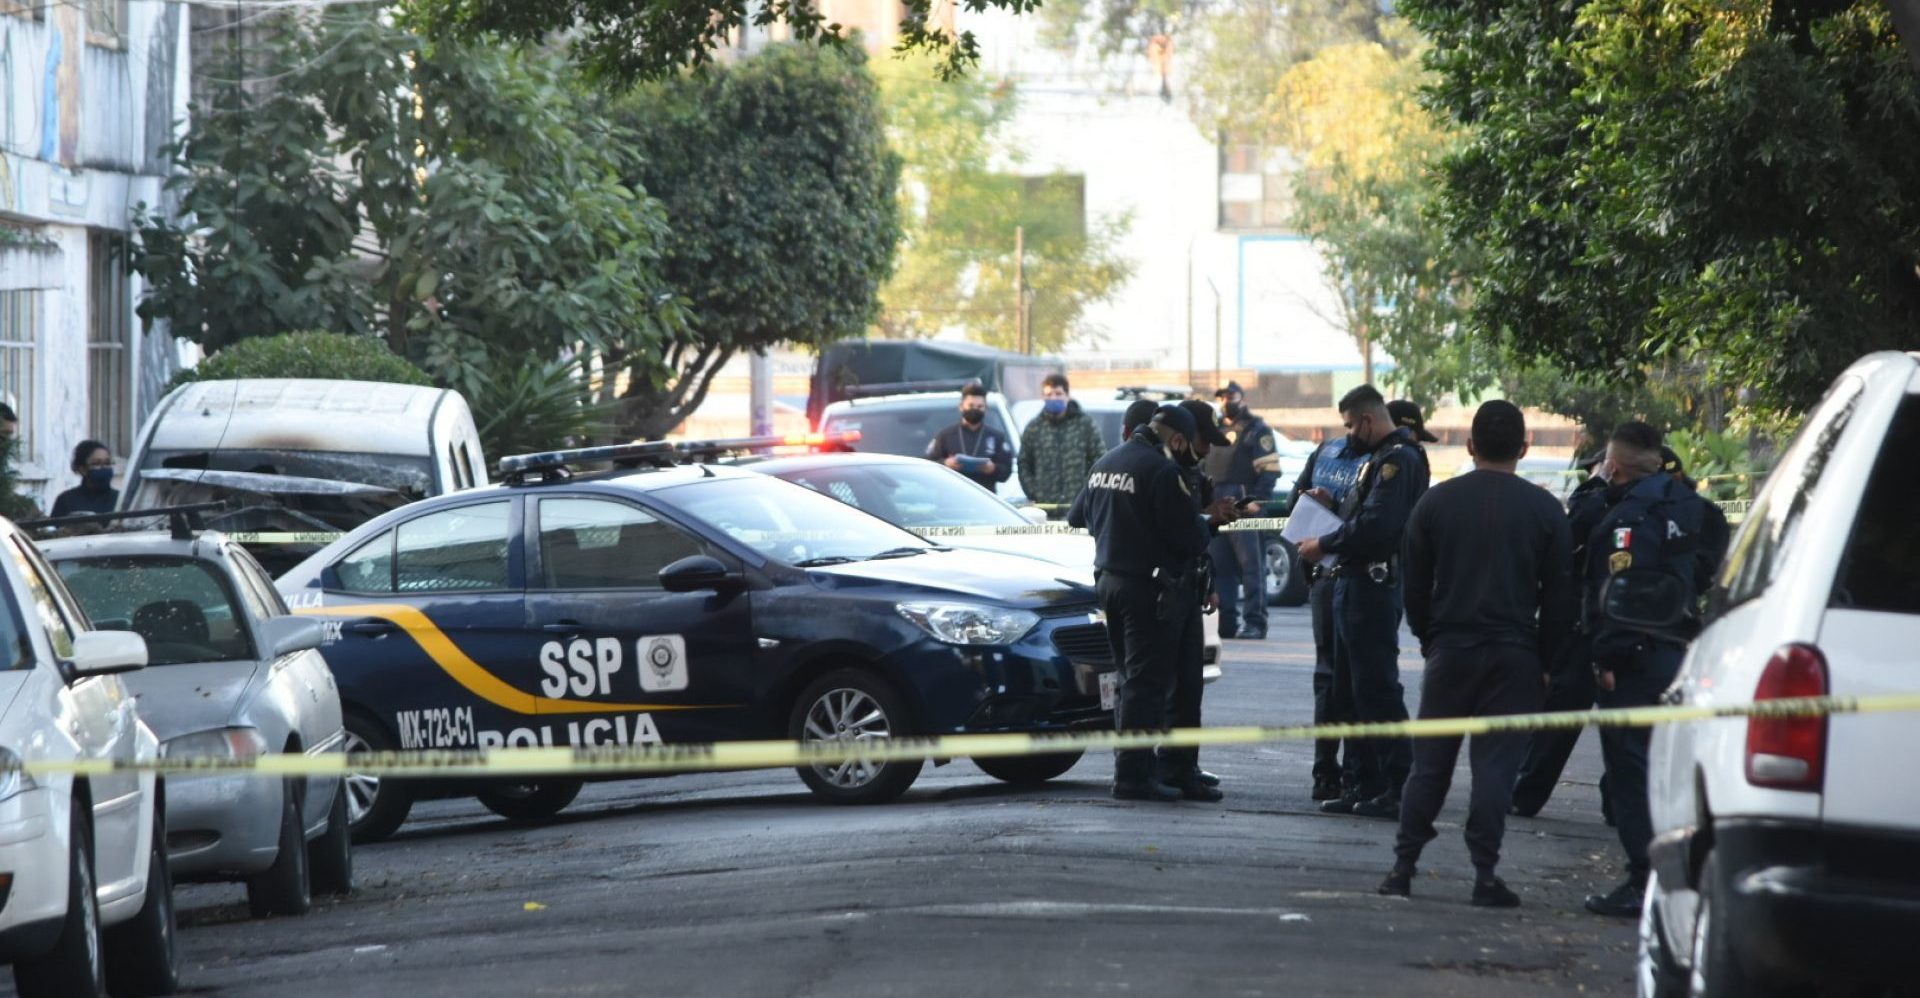 They calcin two bodies in front of NGOs in CDMX; it's an act of intimidation, they accuse